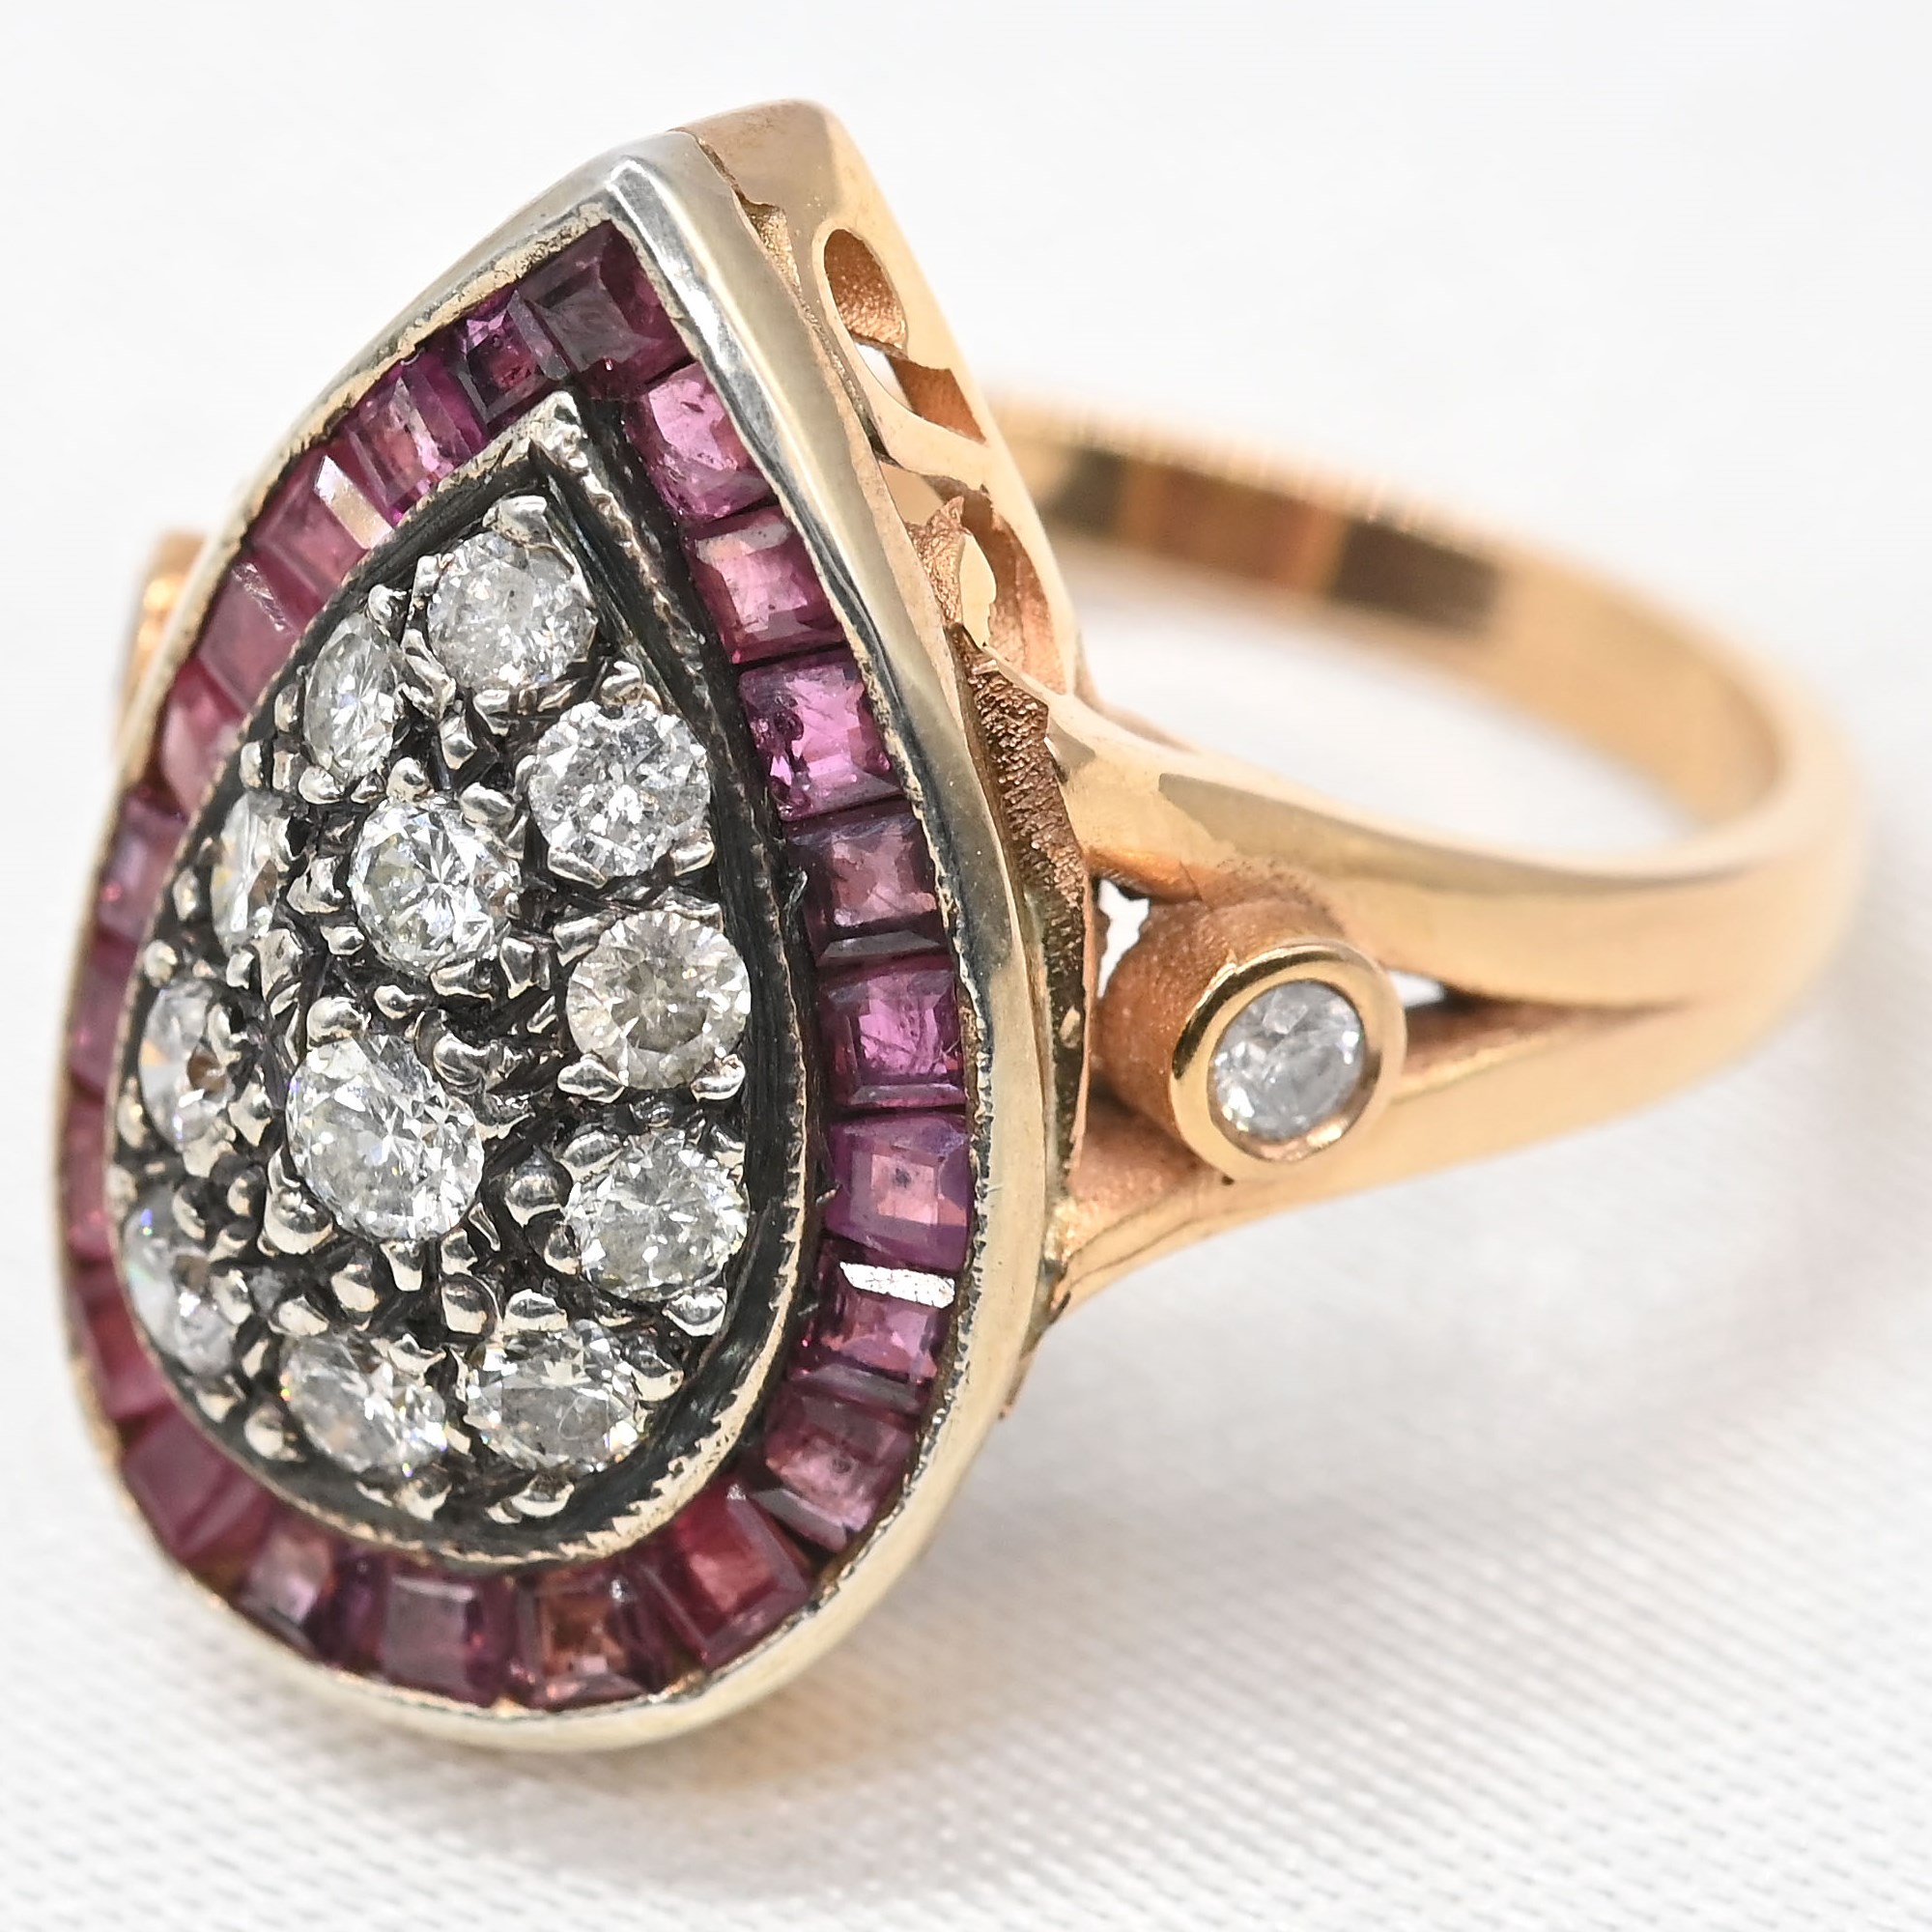 Hand-Made, Vintage Style Ruby and Diamond Pear-Shaped Ring - Image 4 of 8